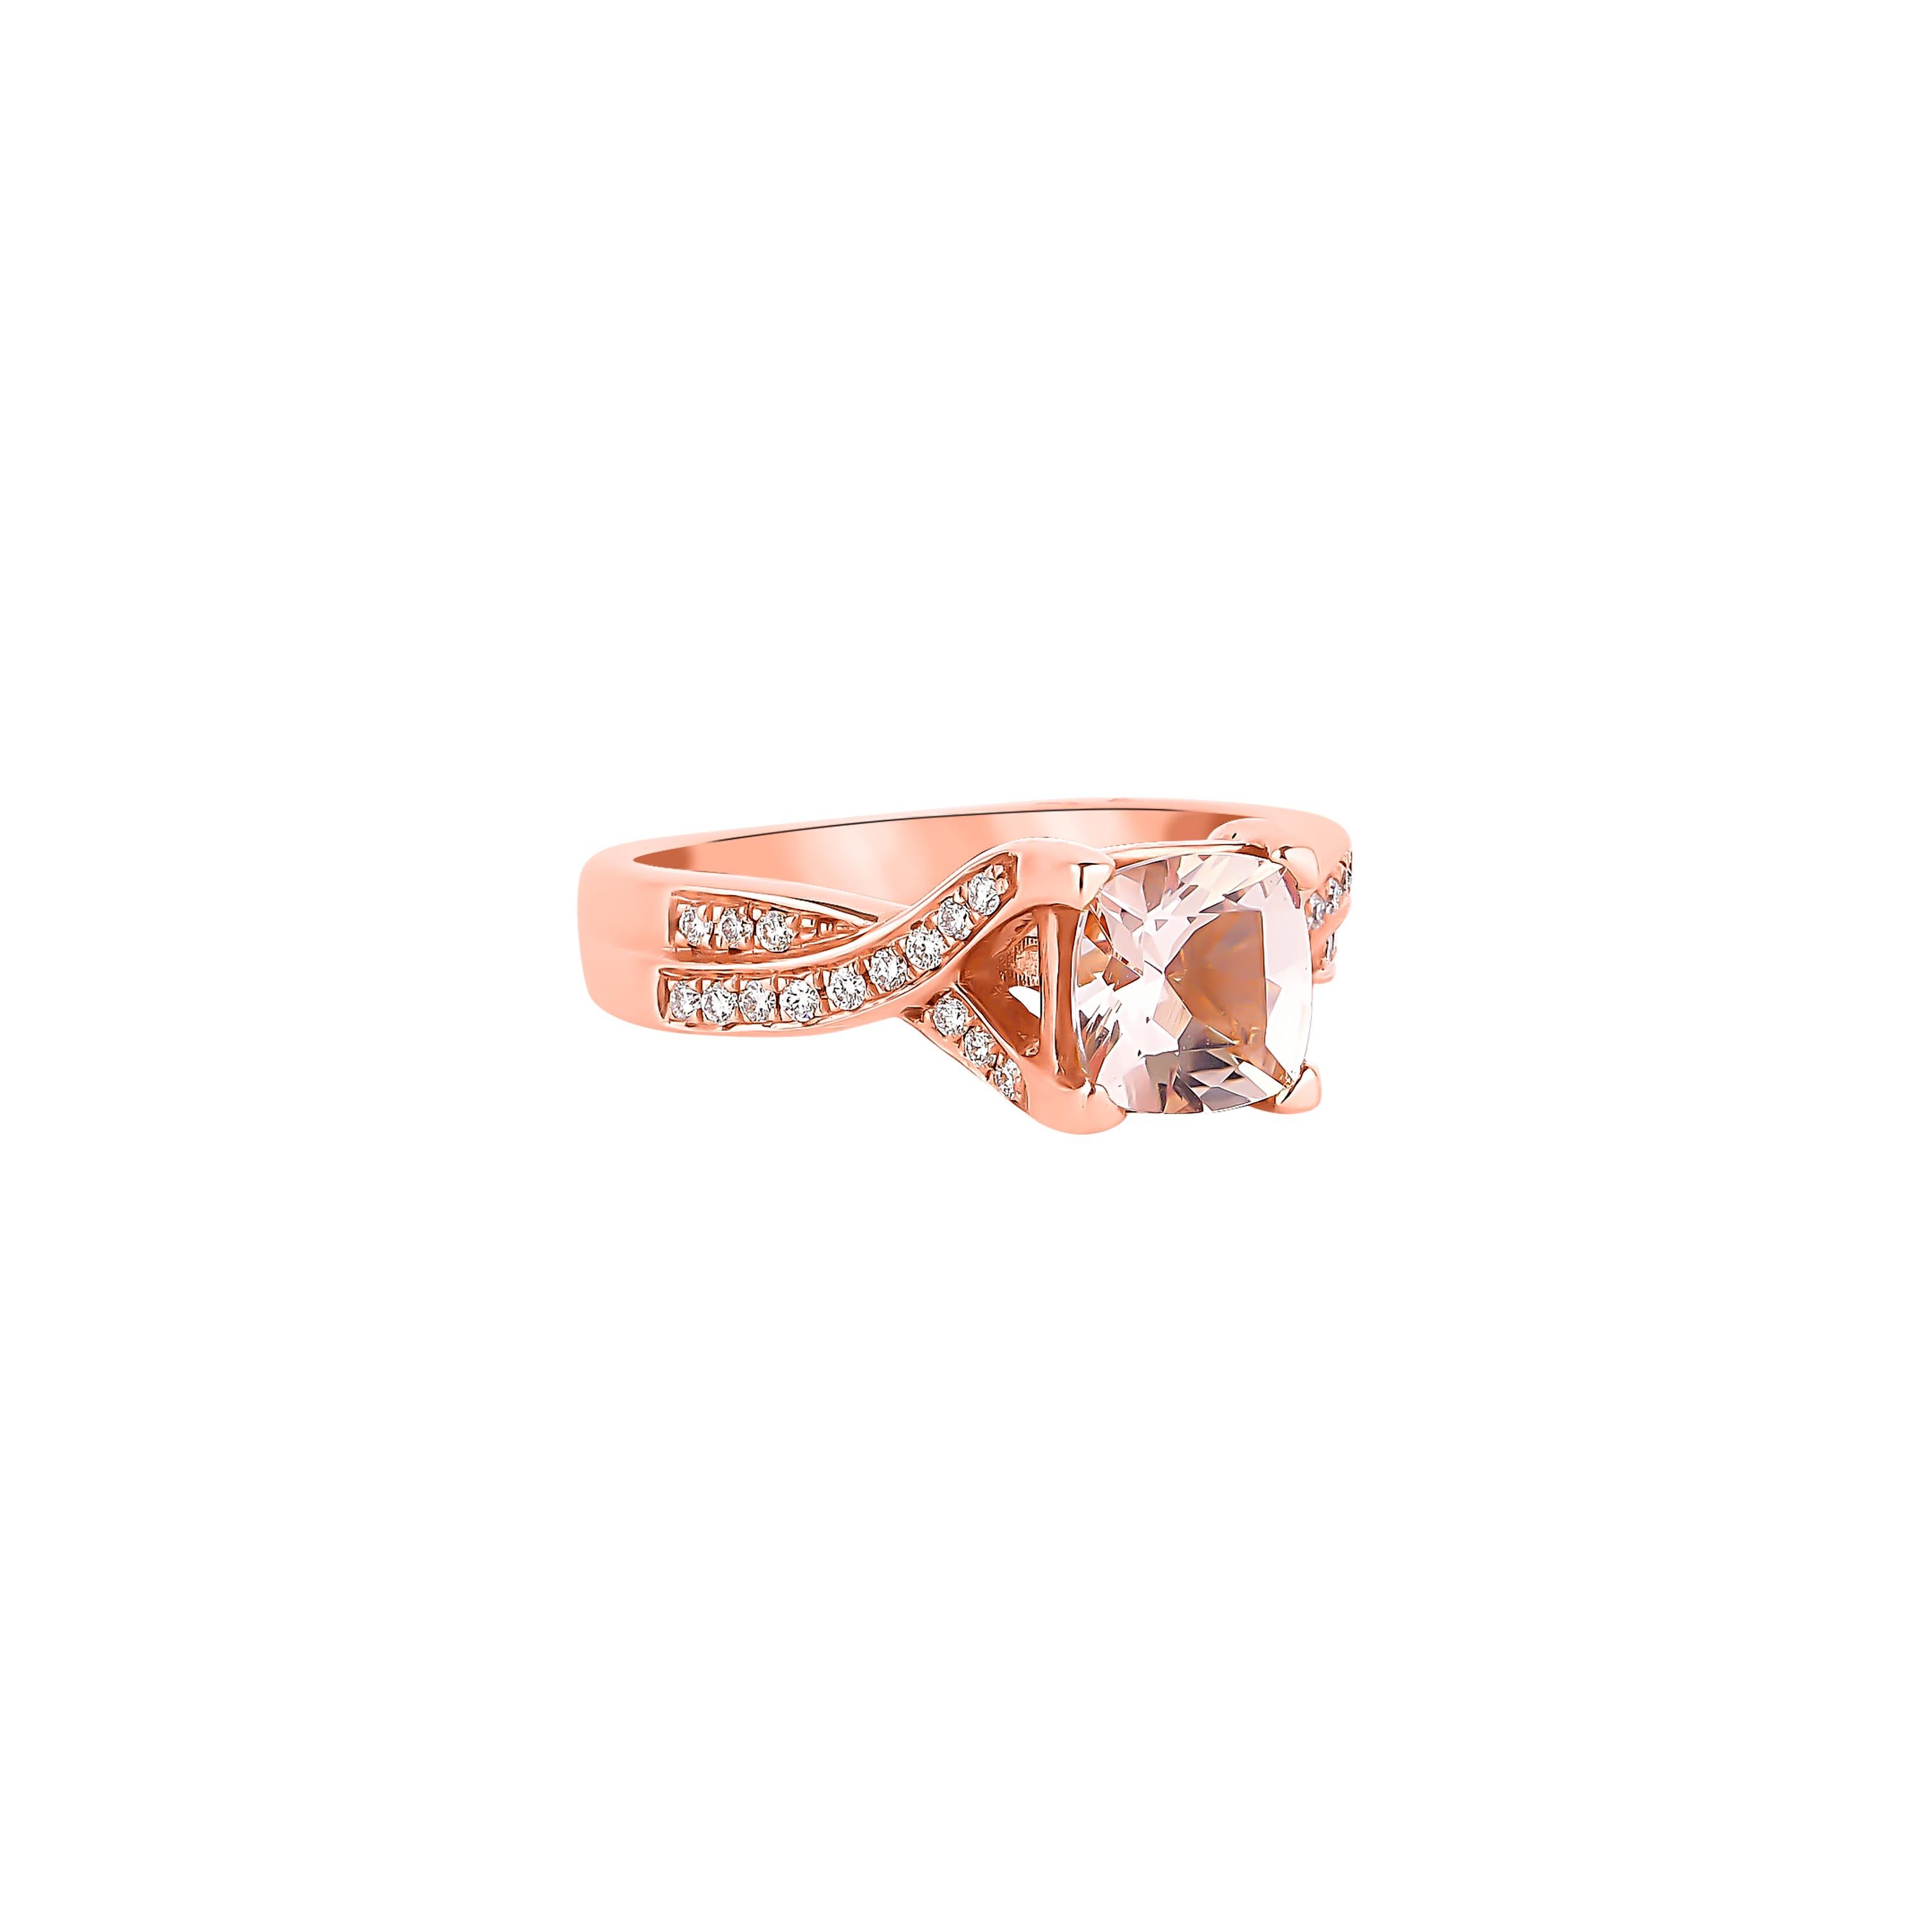 This collection features an array of magnificent morganites! Accented with diamonds these rings are made in rose gold and present a classic yet elegant look. 

Classic morganite ring in 18K rose gold with diamonds. 

Morganite: 1.28 carat cushion